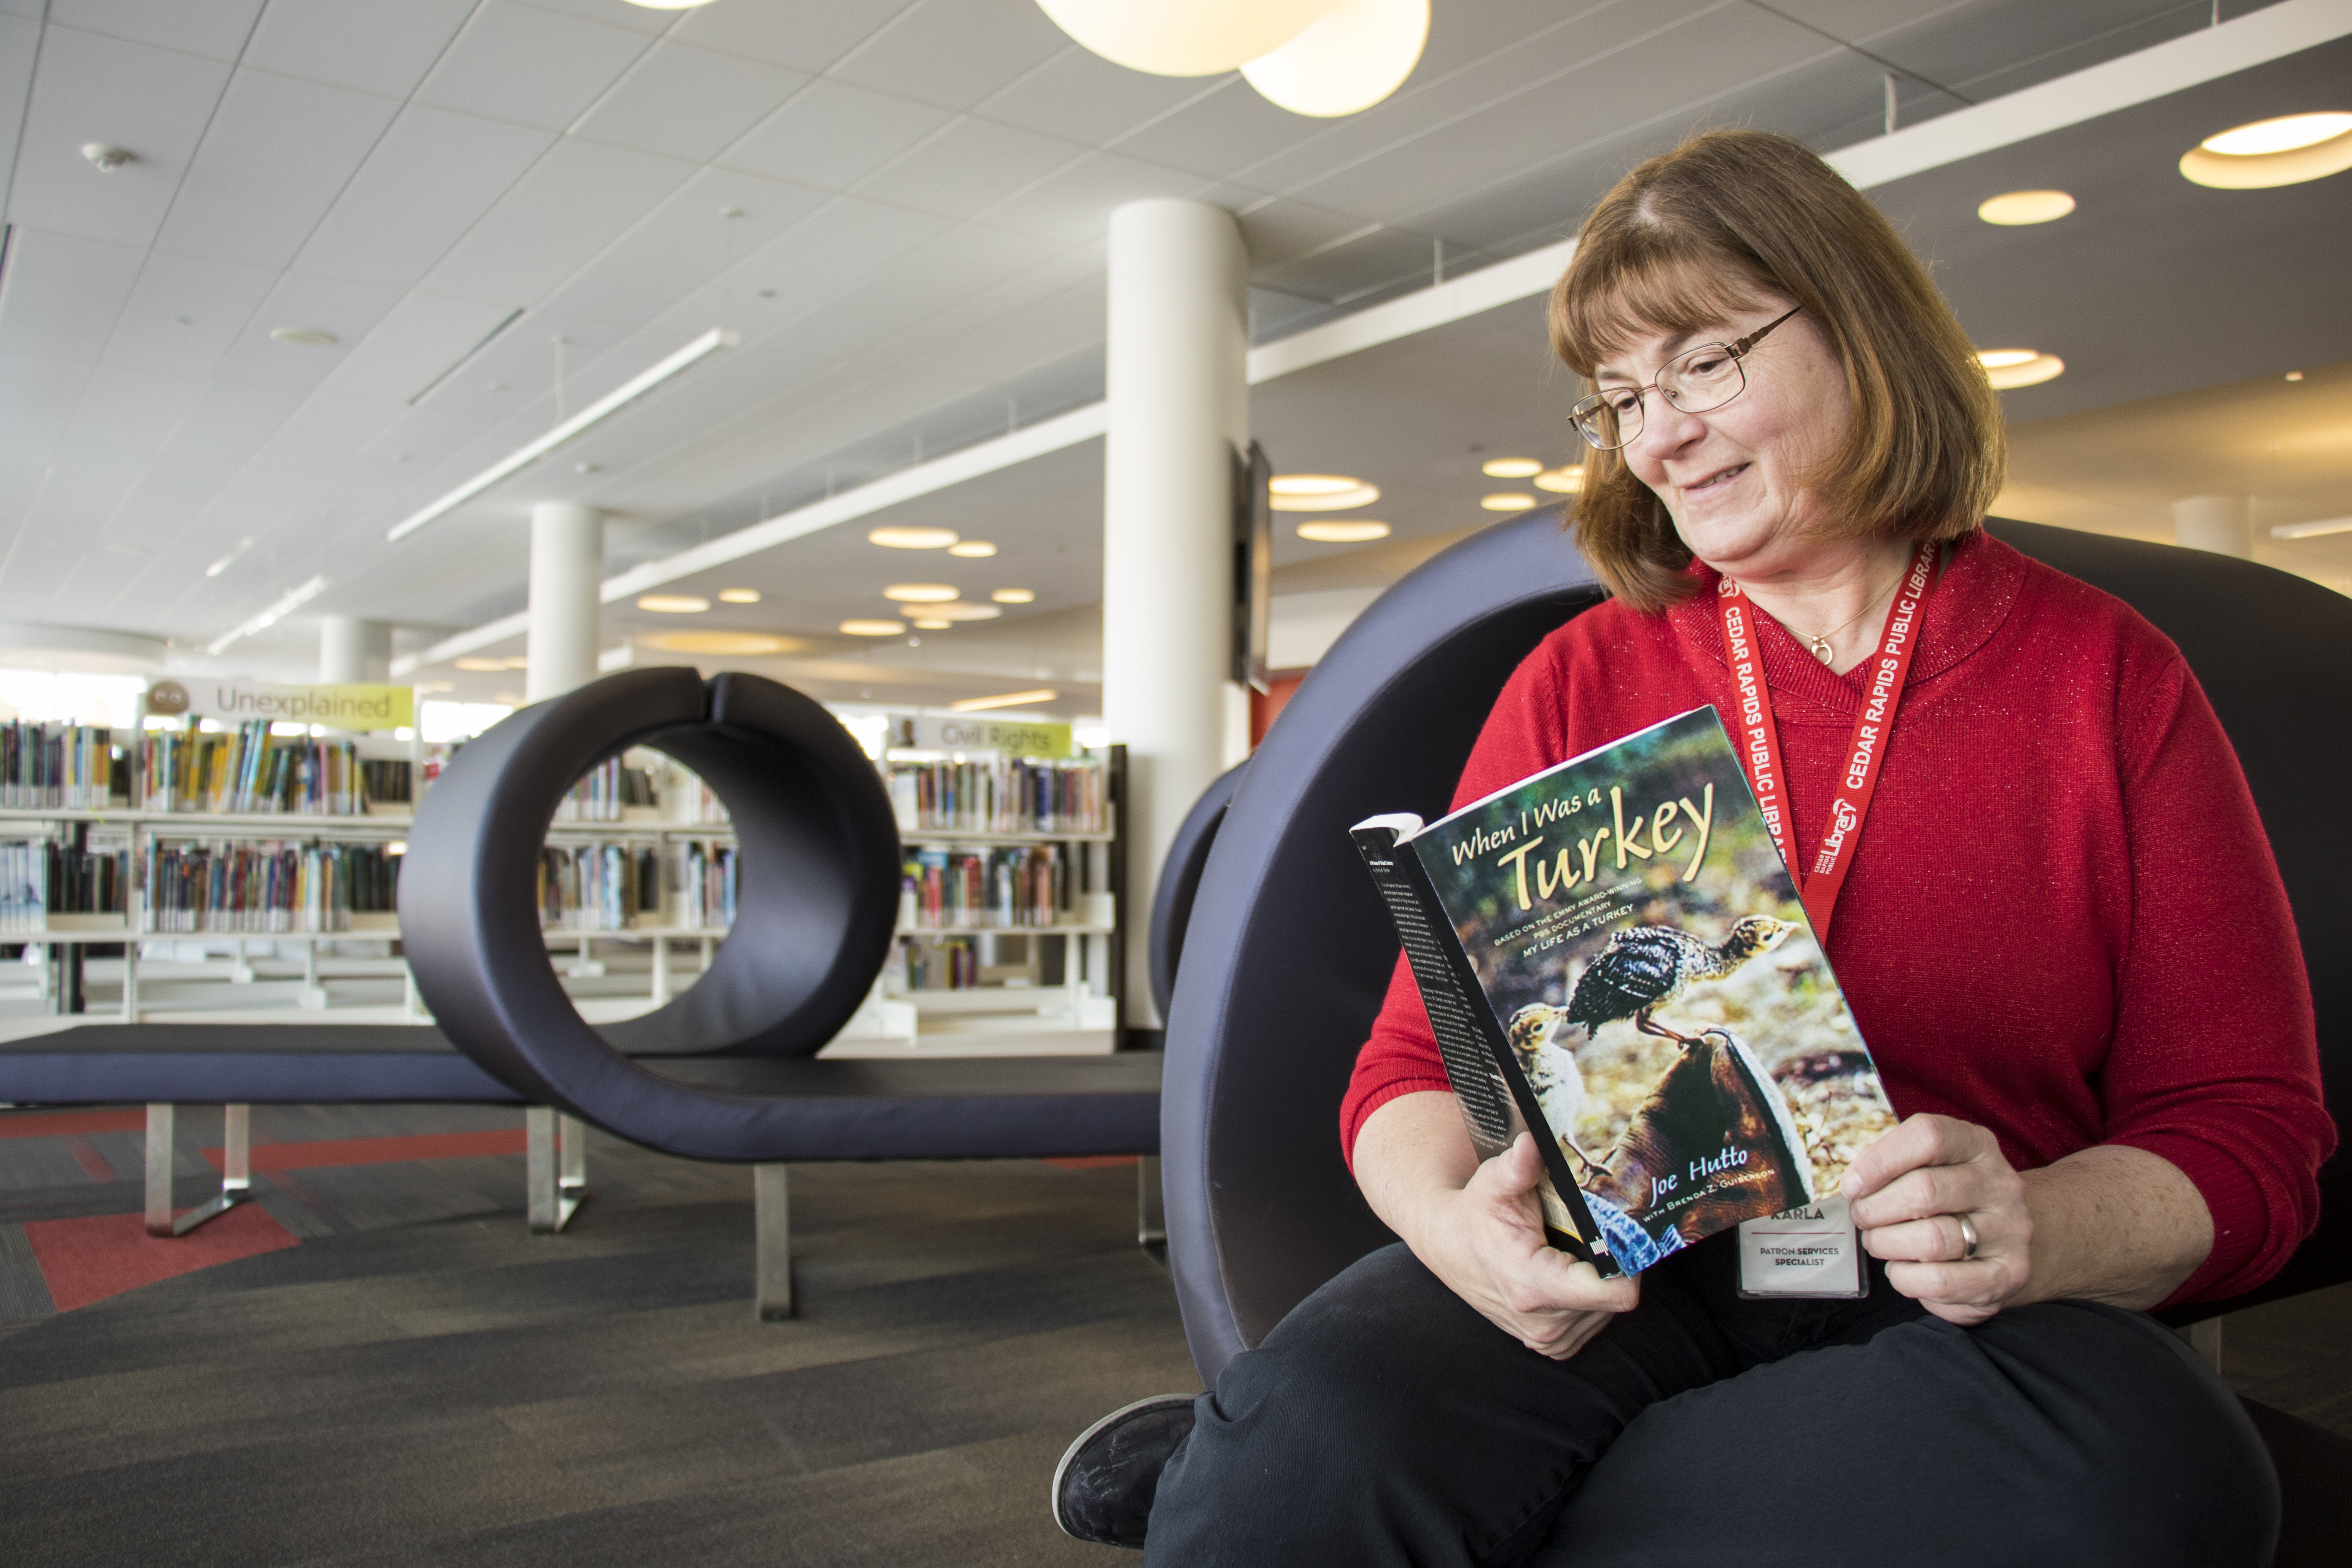 A woman in a red shirt reads a book in the library.